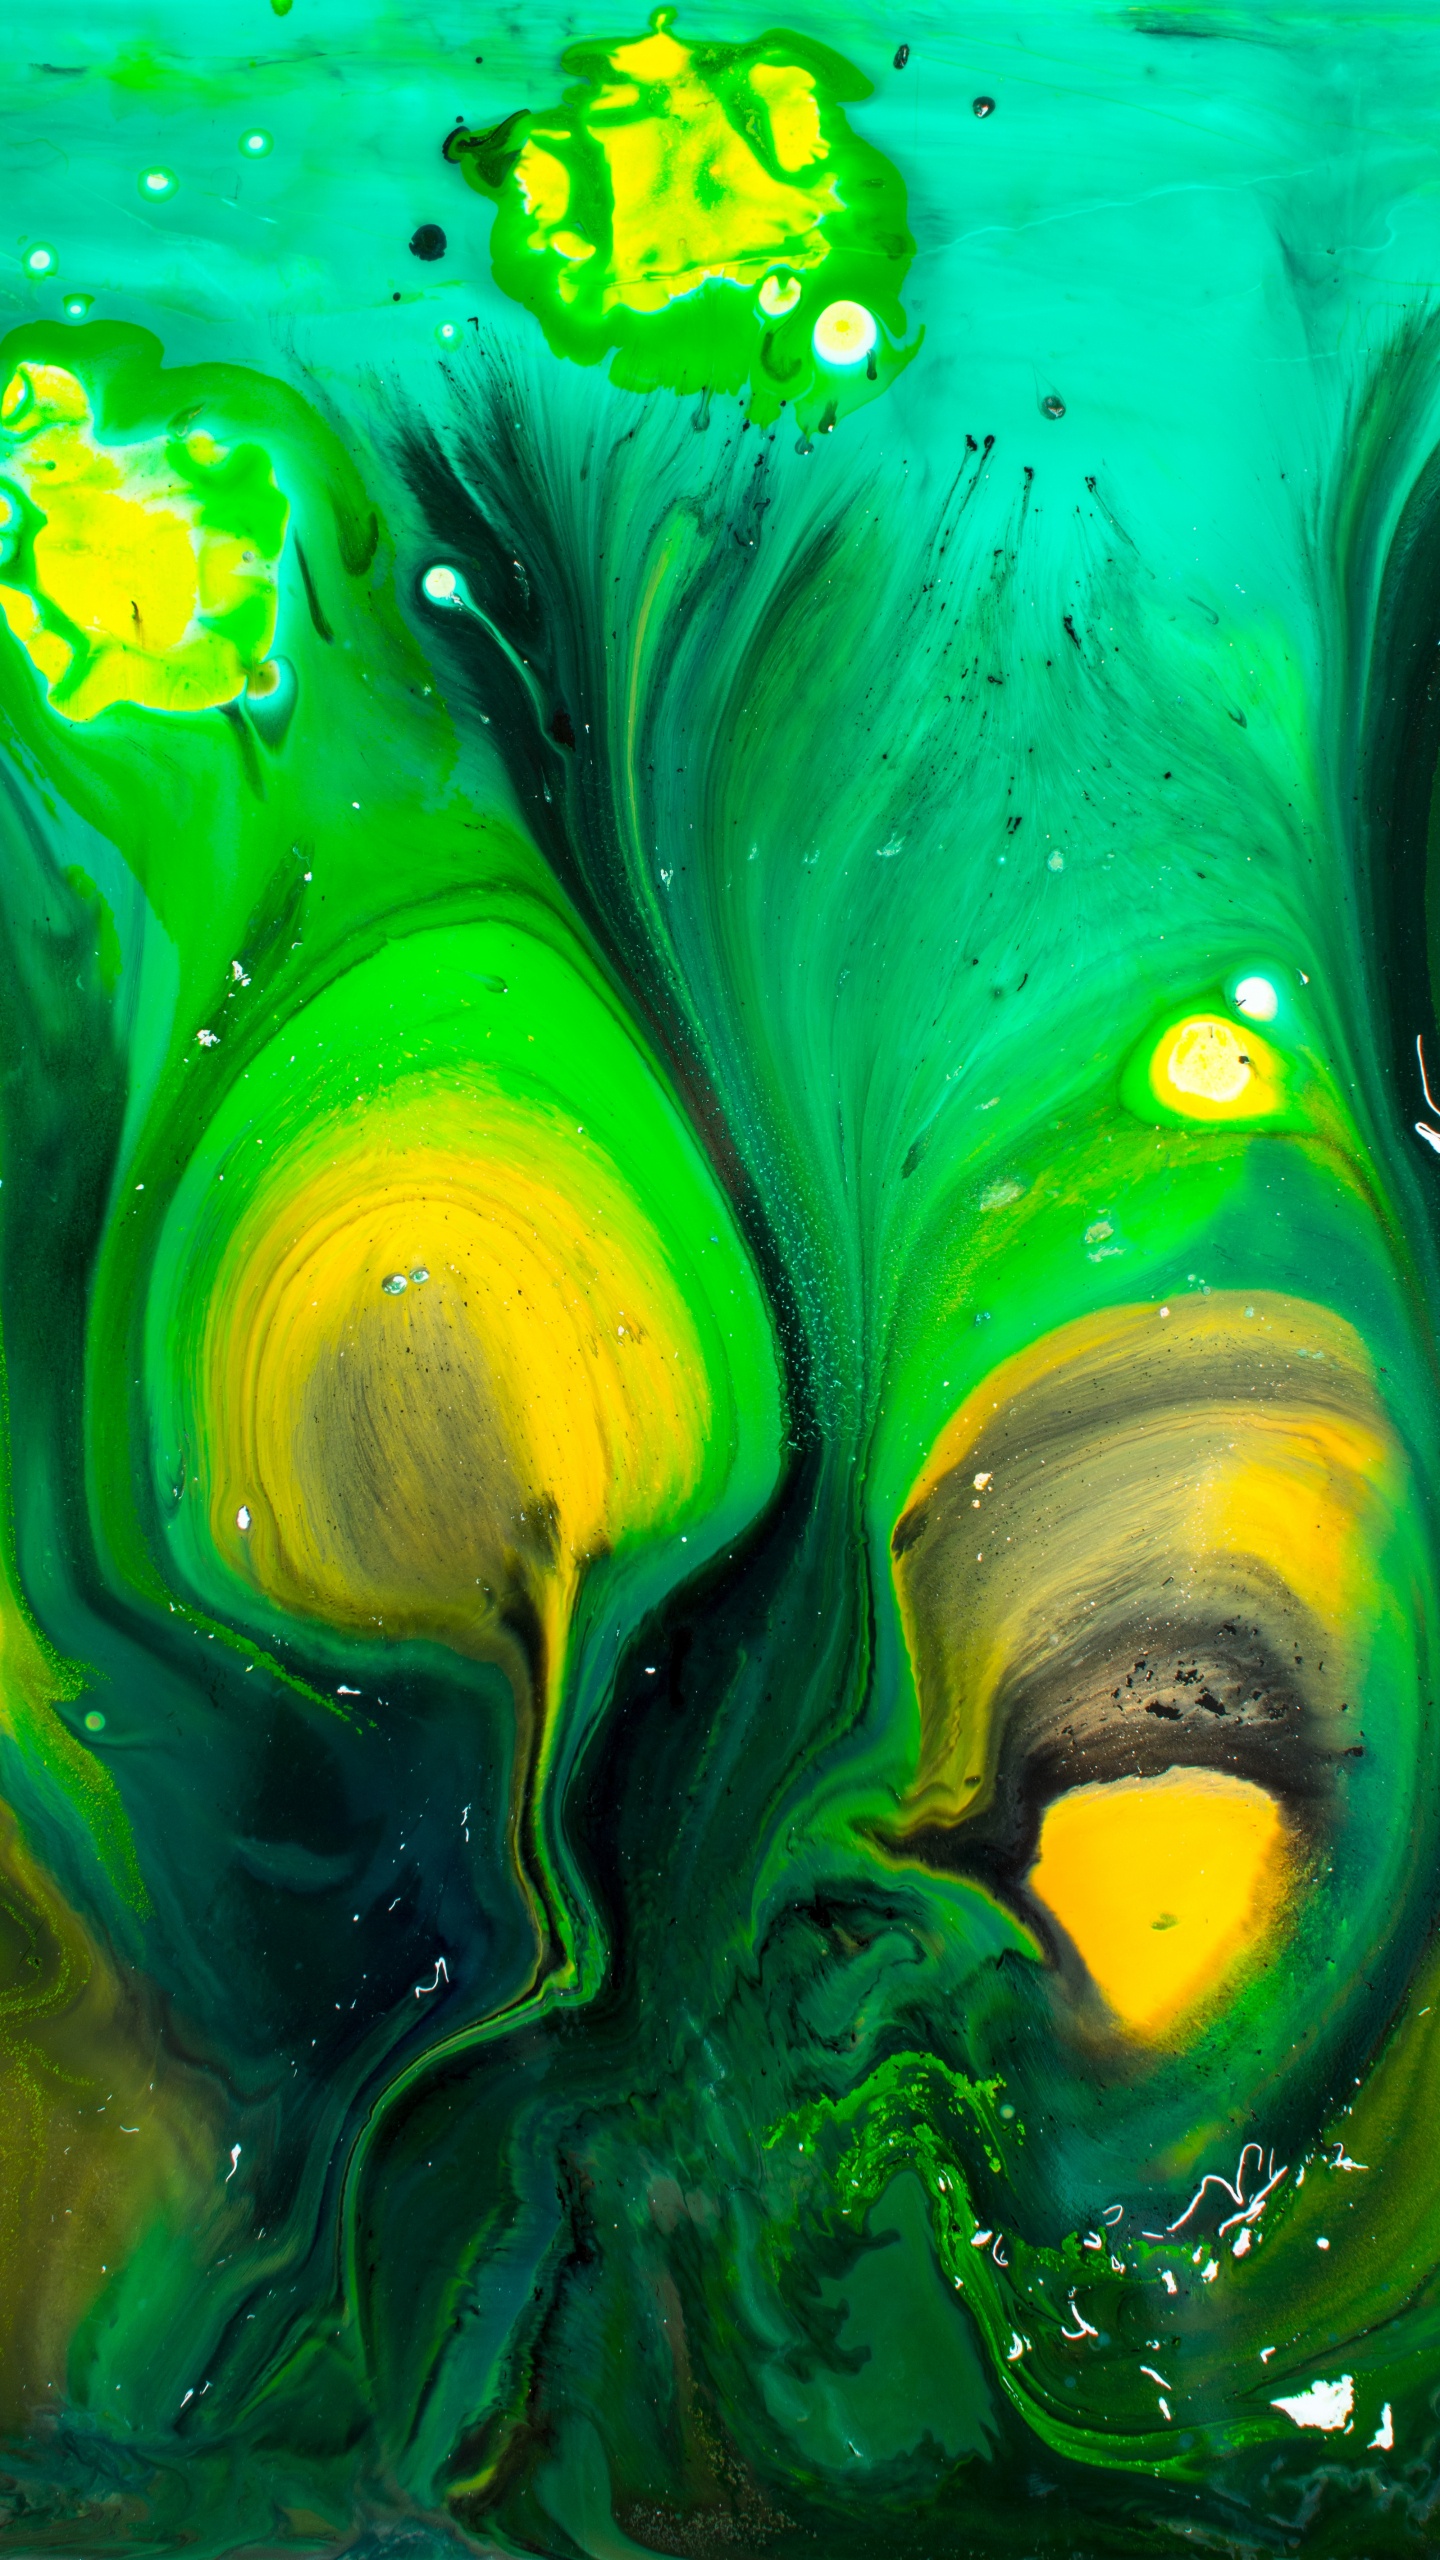 Green and Yellow Abstract Painting. Wallpaper in 1440x2560 Resolution